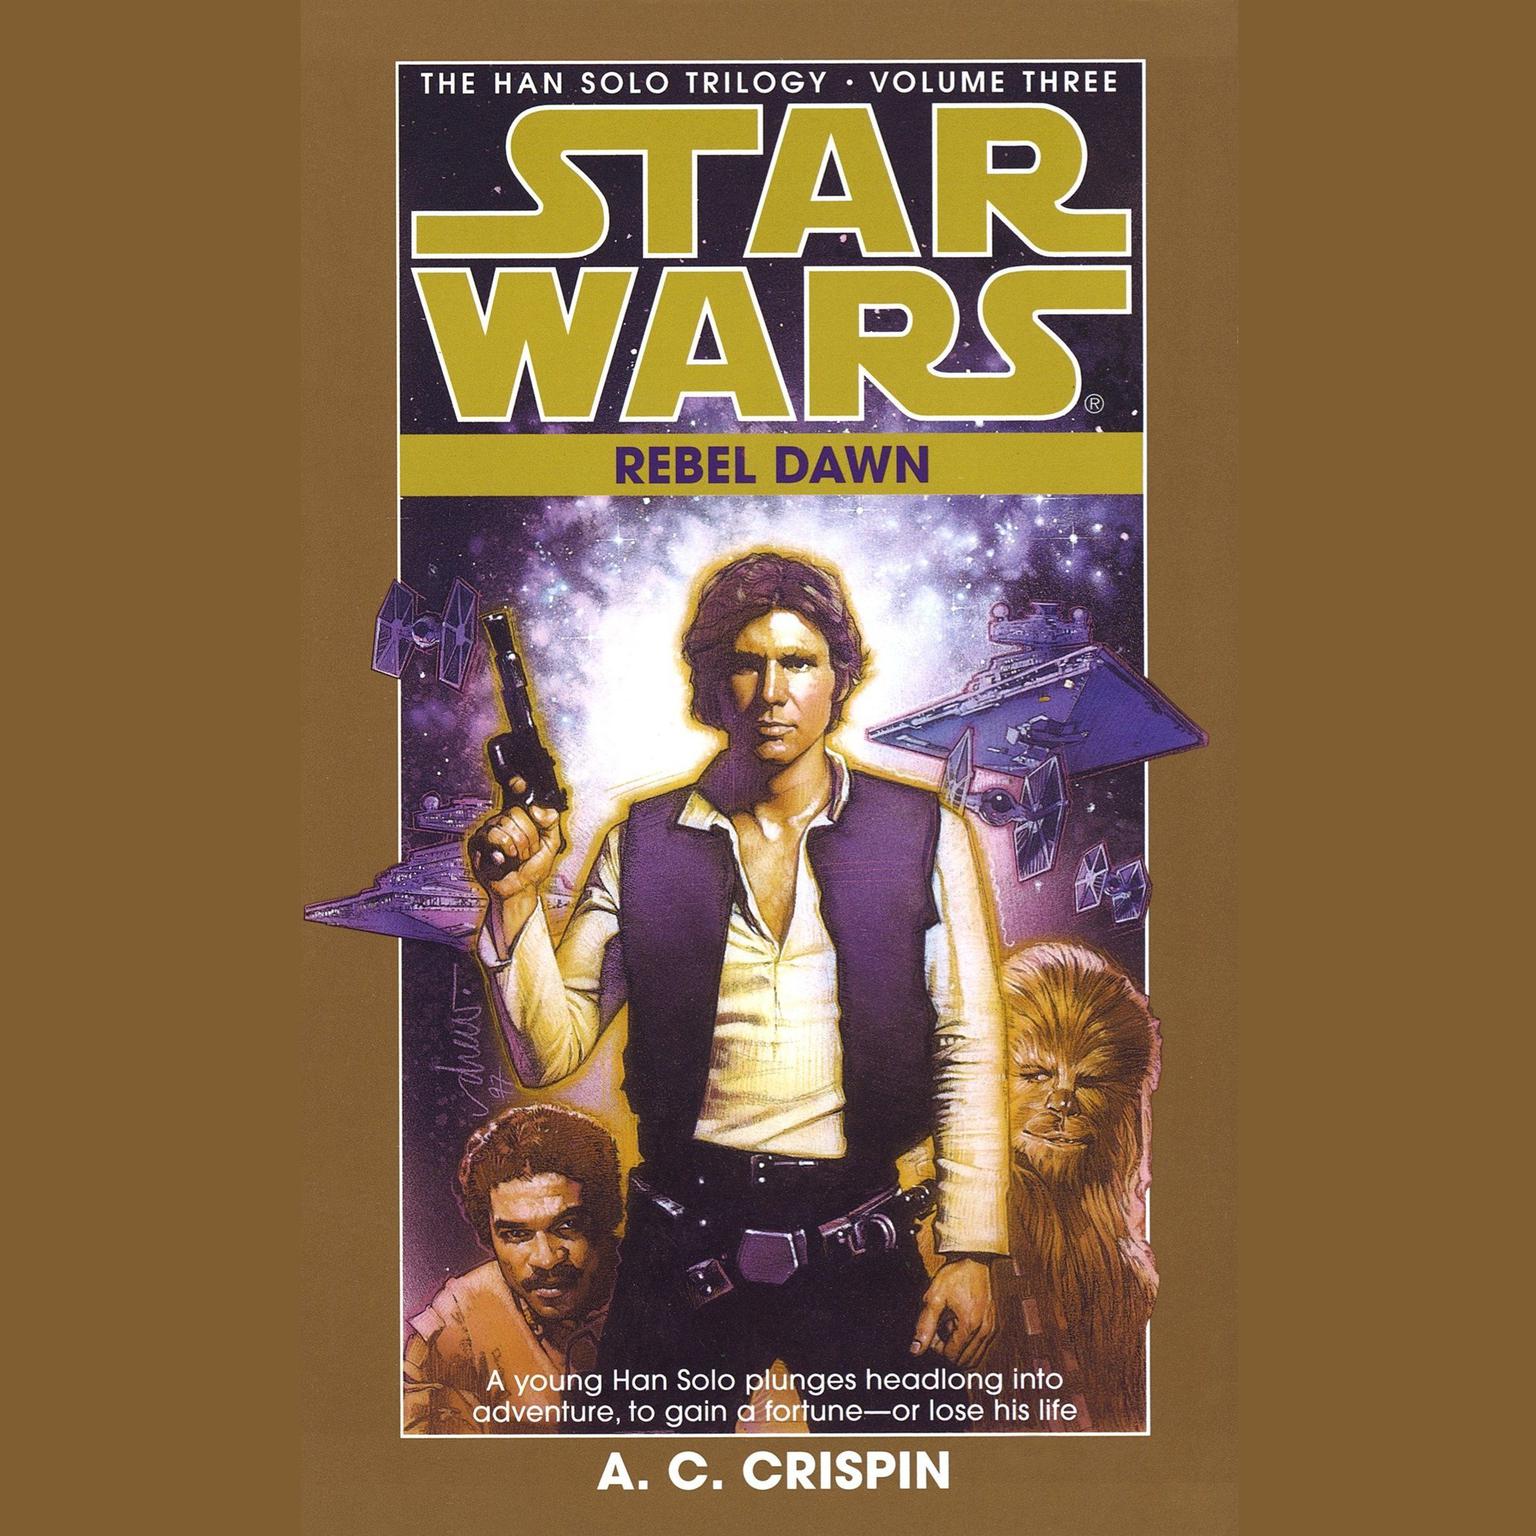 Star Wars: The Han Solo Trilogy: Rebel Dawn (Abridged): Volume 3 Audiobook, by A. C. Crispin